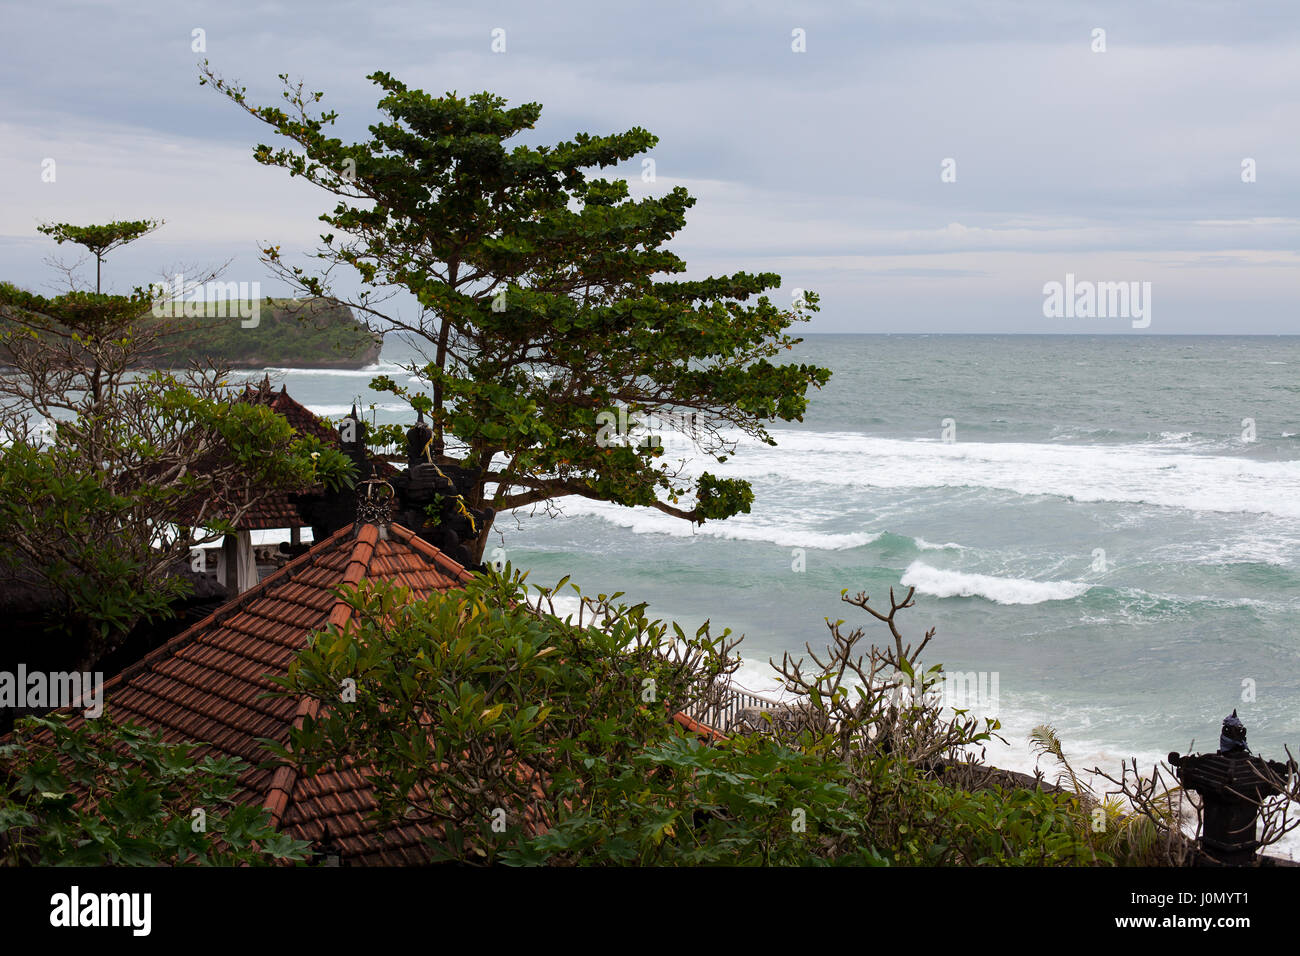 The wind shakes the trees and catches a wave in the ocean temple on the sea shore Stock Photo